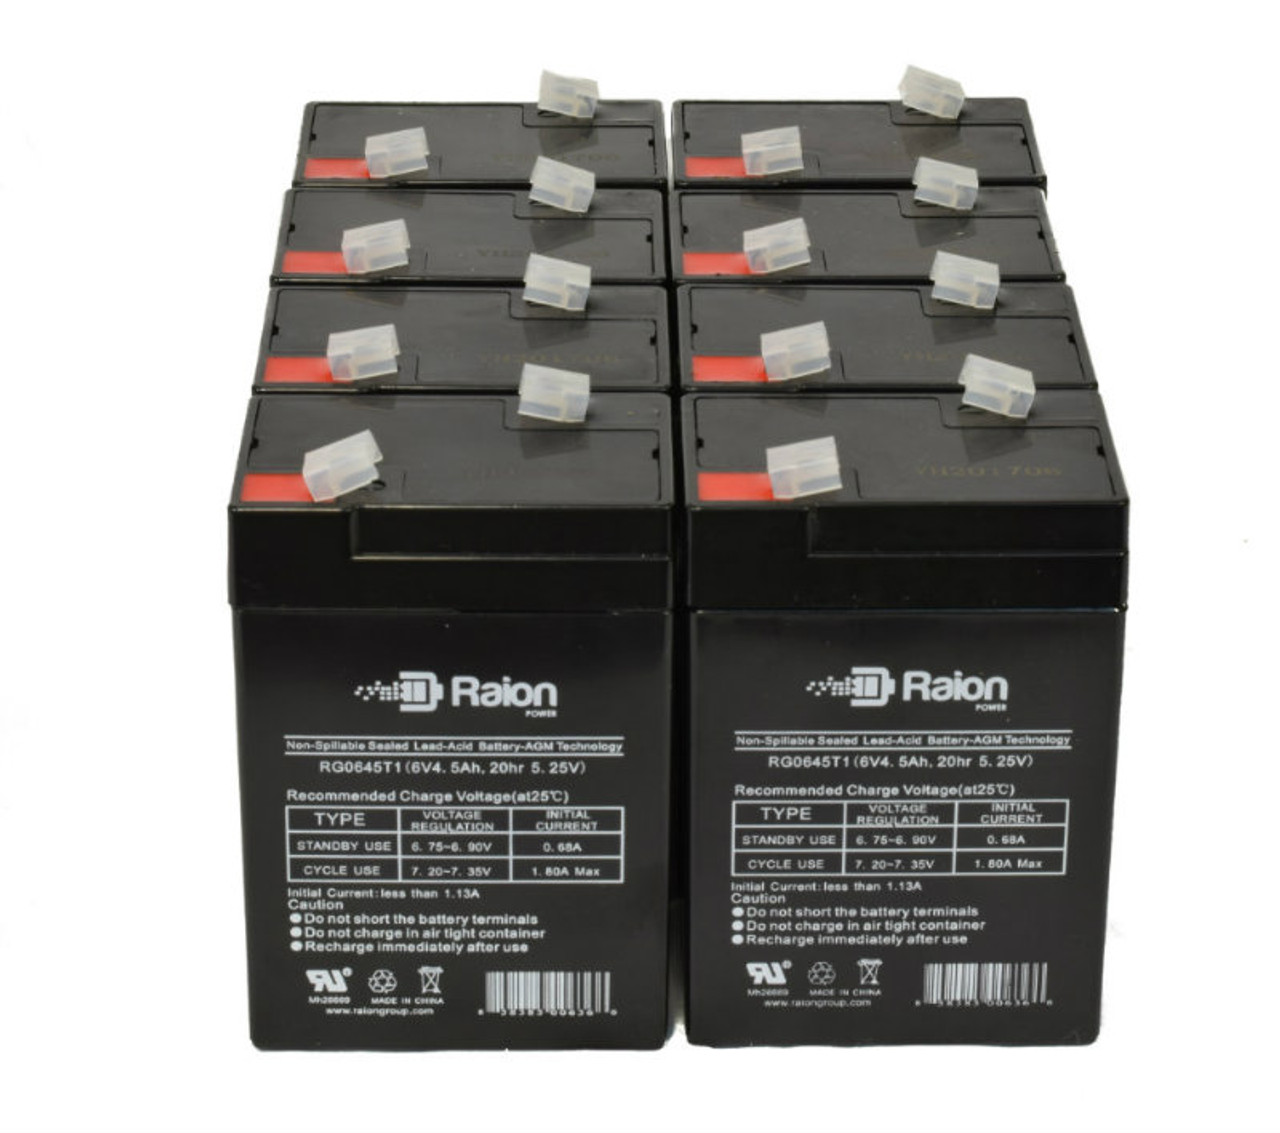 Raion Power RG0645T1 6V 4.5Ah Replacement Medical Equipment Battery for Alaris Medical 821 Intell Pump - 8 Pack